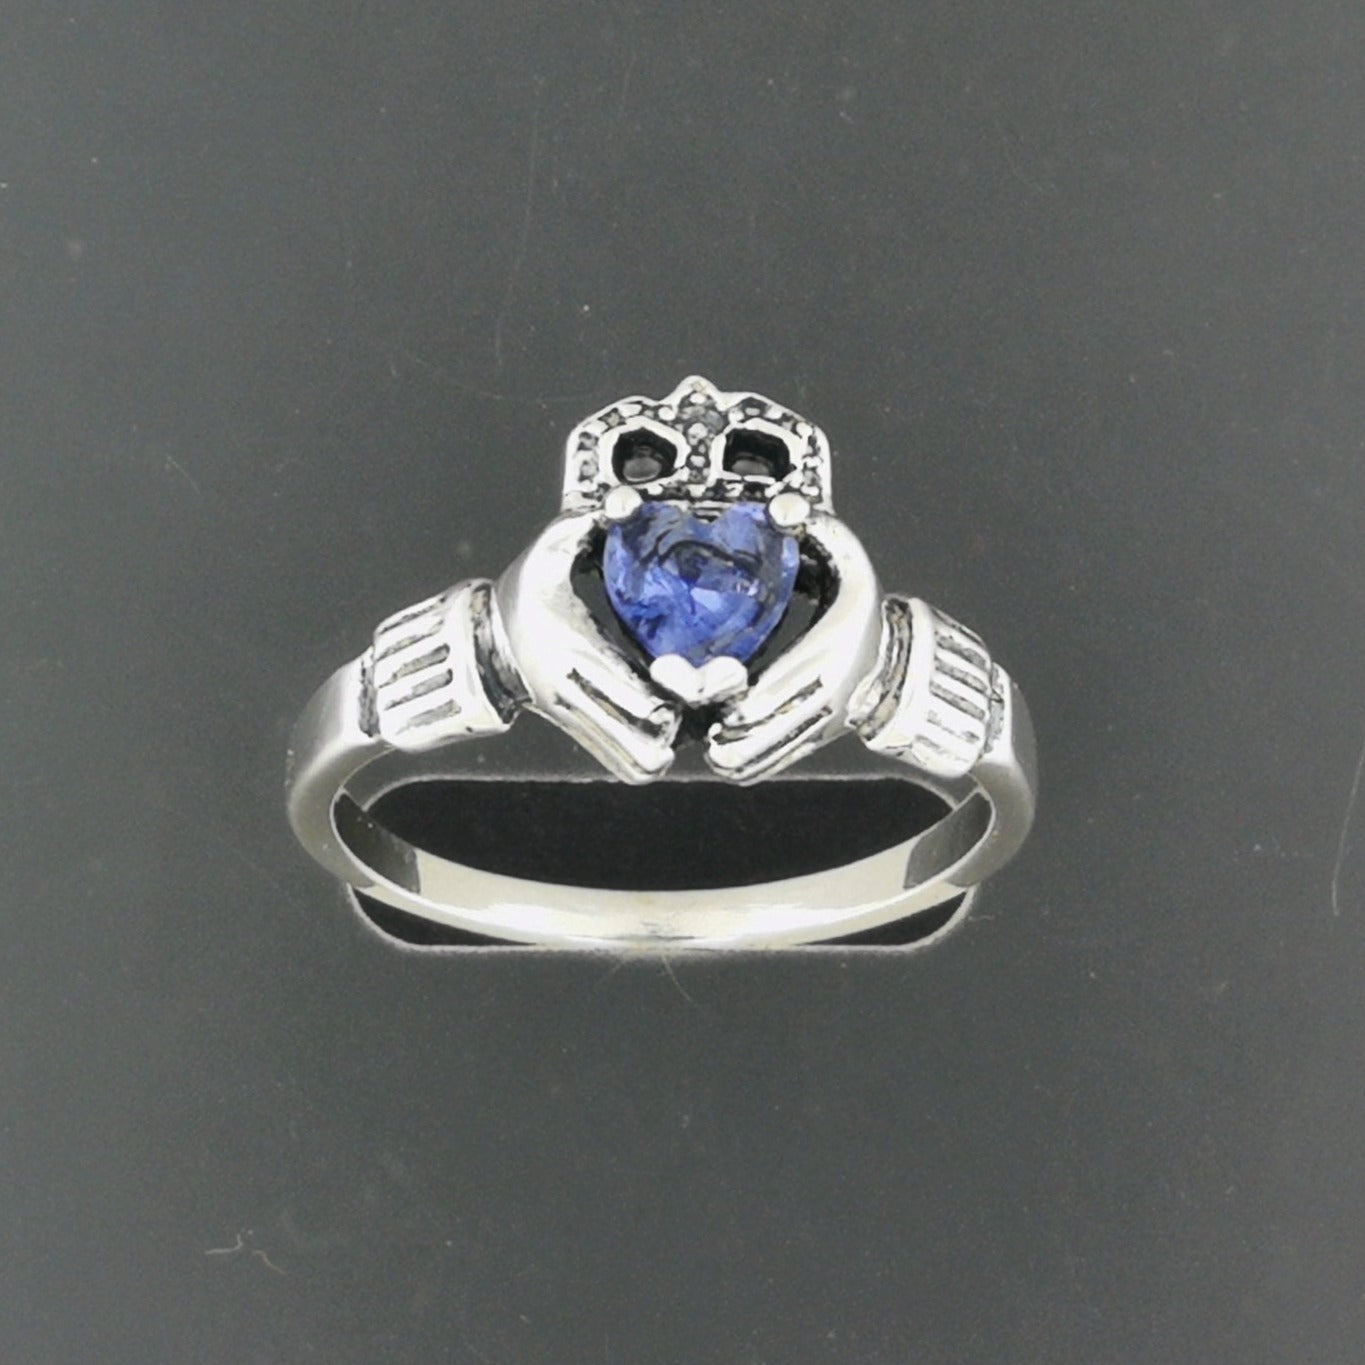 925 Sterling Silver Claddagh Ring with March Birthstone Heart, Irish Celtic Claddagh Ring with Gemstone, Ladies Celtic Claddagh Ring with Gemstone, Birthstone Claddagh Ring, Claddagh Ring For Women, Gemstone Claddagh Ring, Silver Gemstone Claddagh